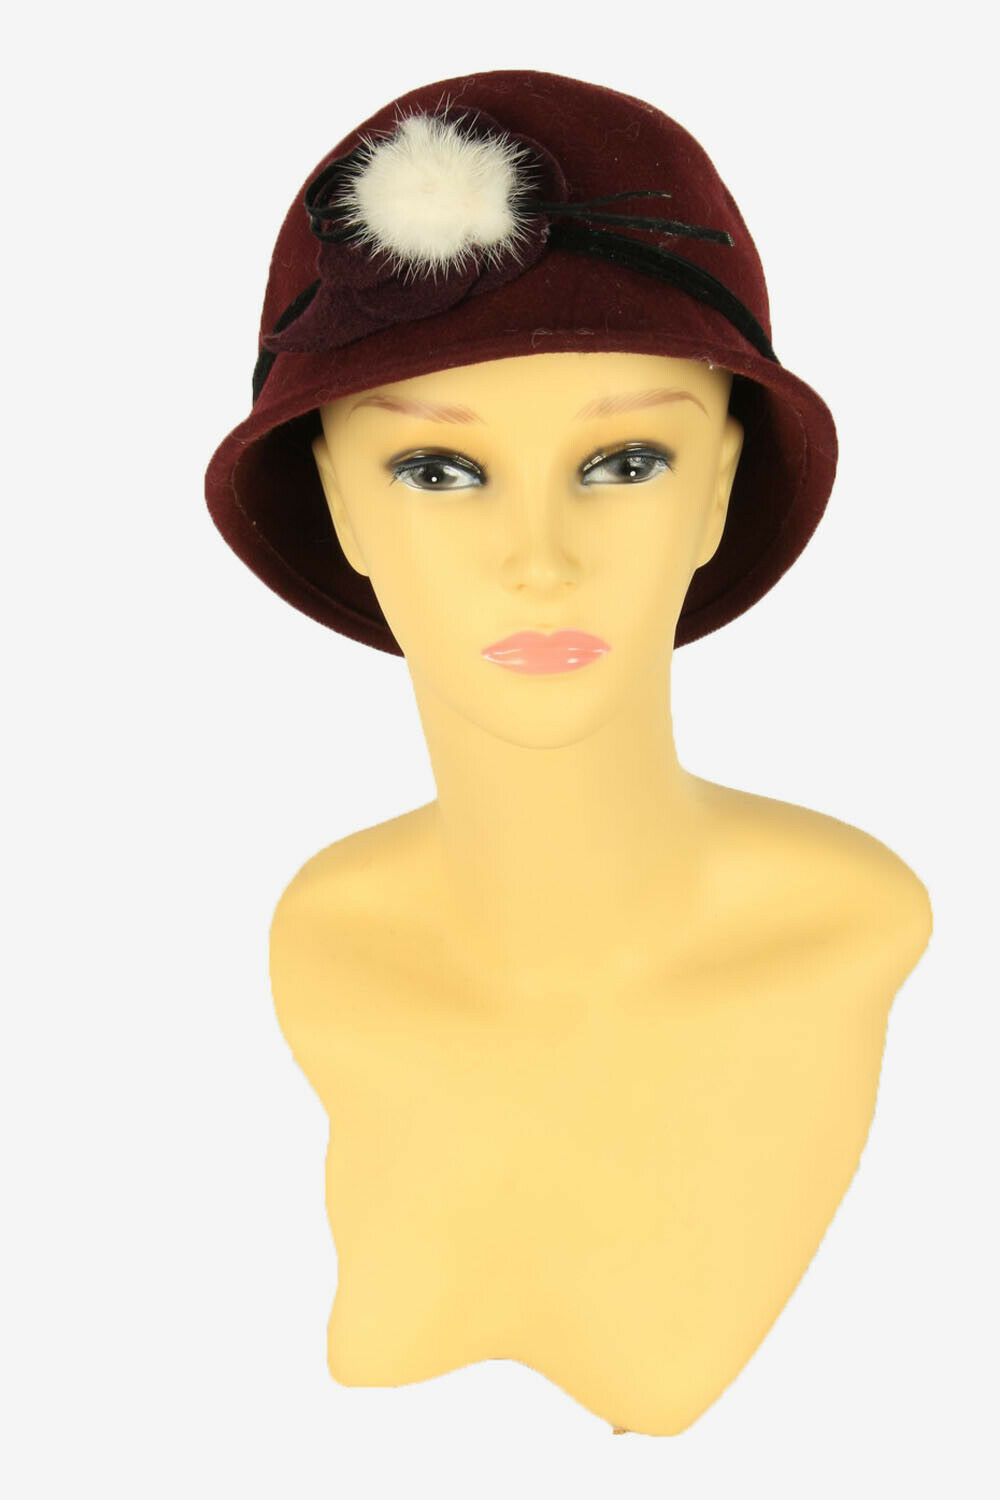 Bucket Vintage Hat Womens Classic Design Country 90s Burgundy Size 58 cm